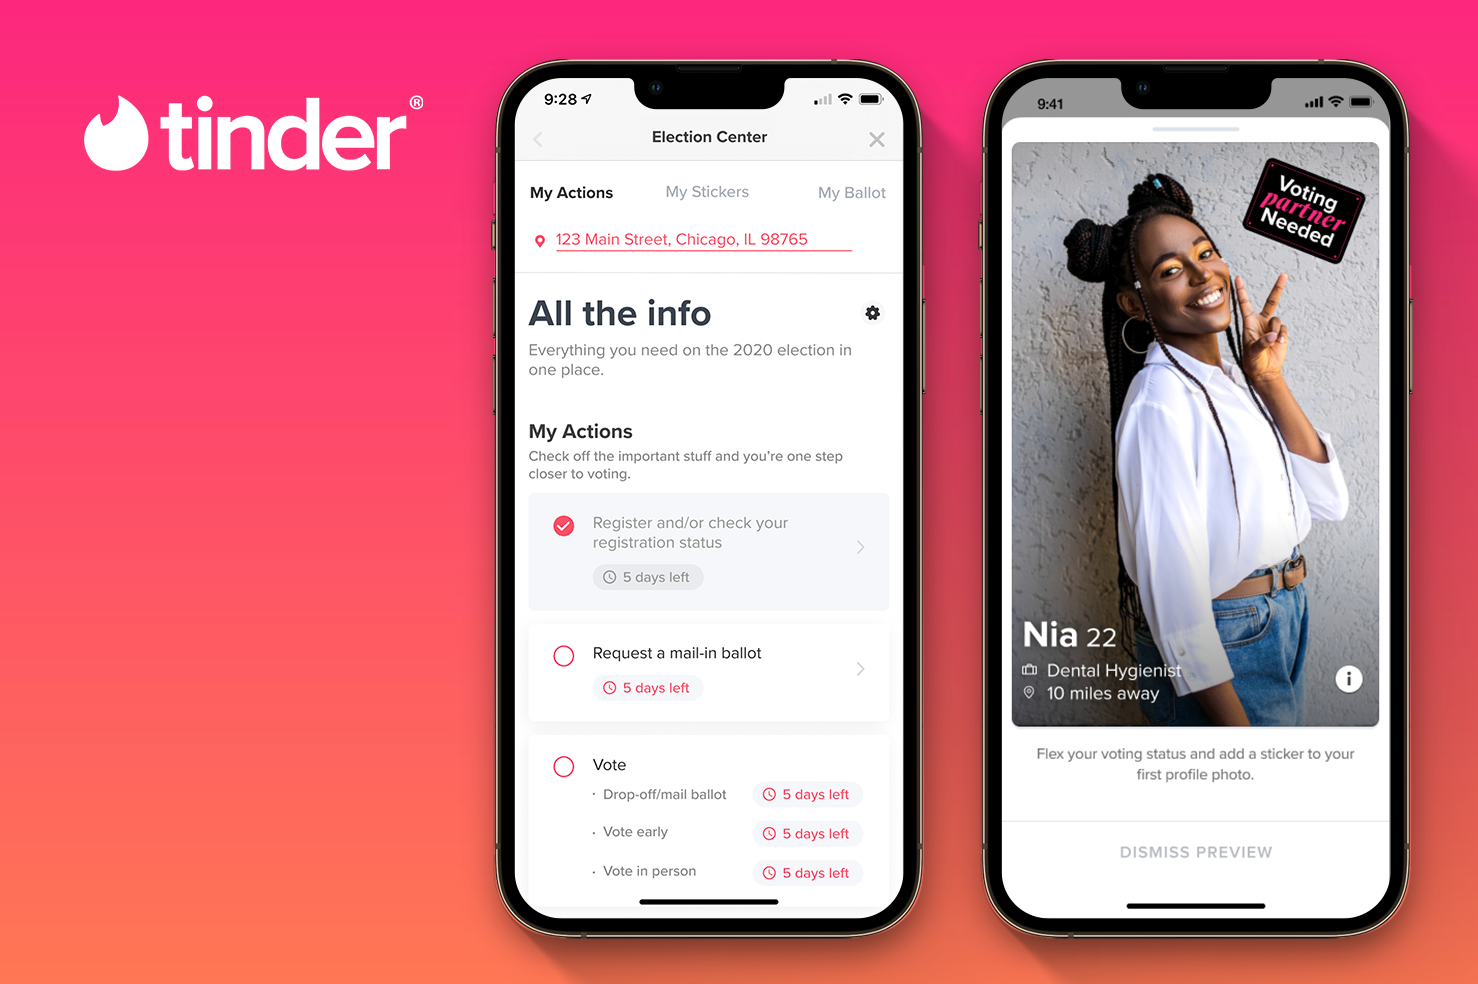 The Tinder logo appears next to two phone screens, one showing some information title Election Center, the other showing a profile of a young woman.